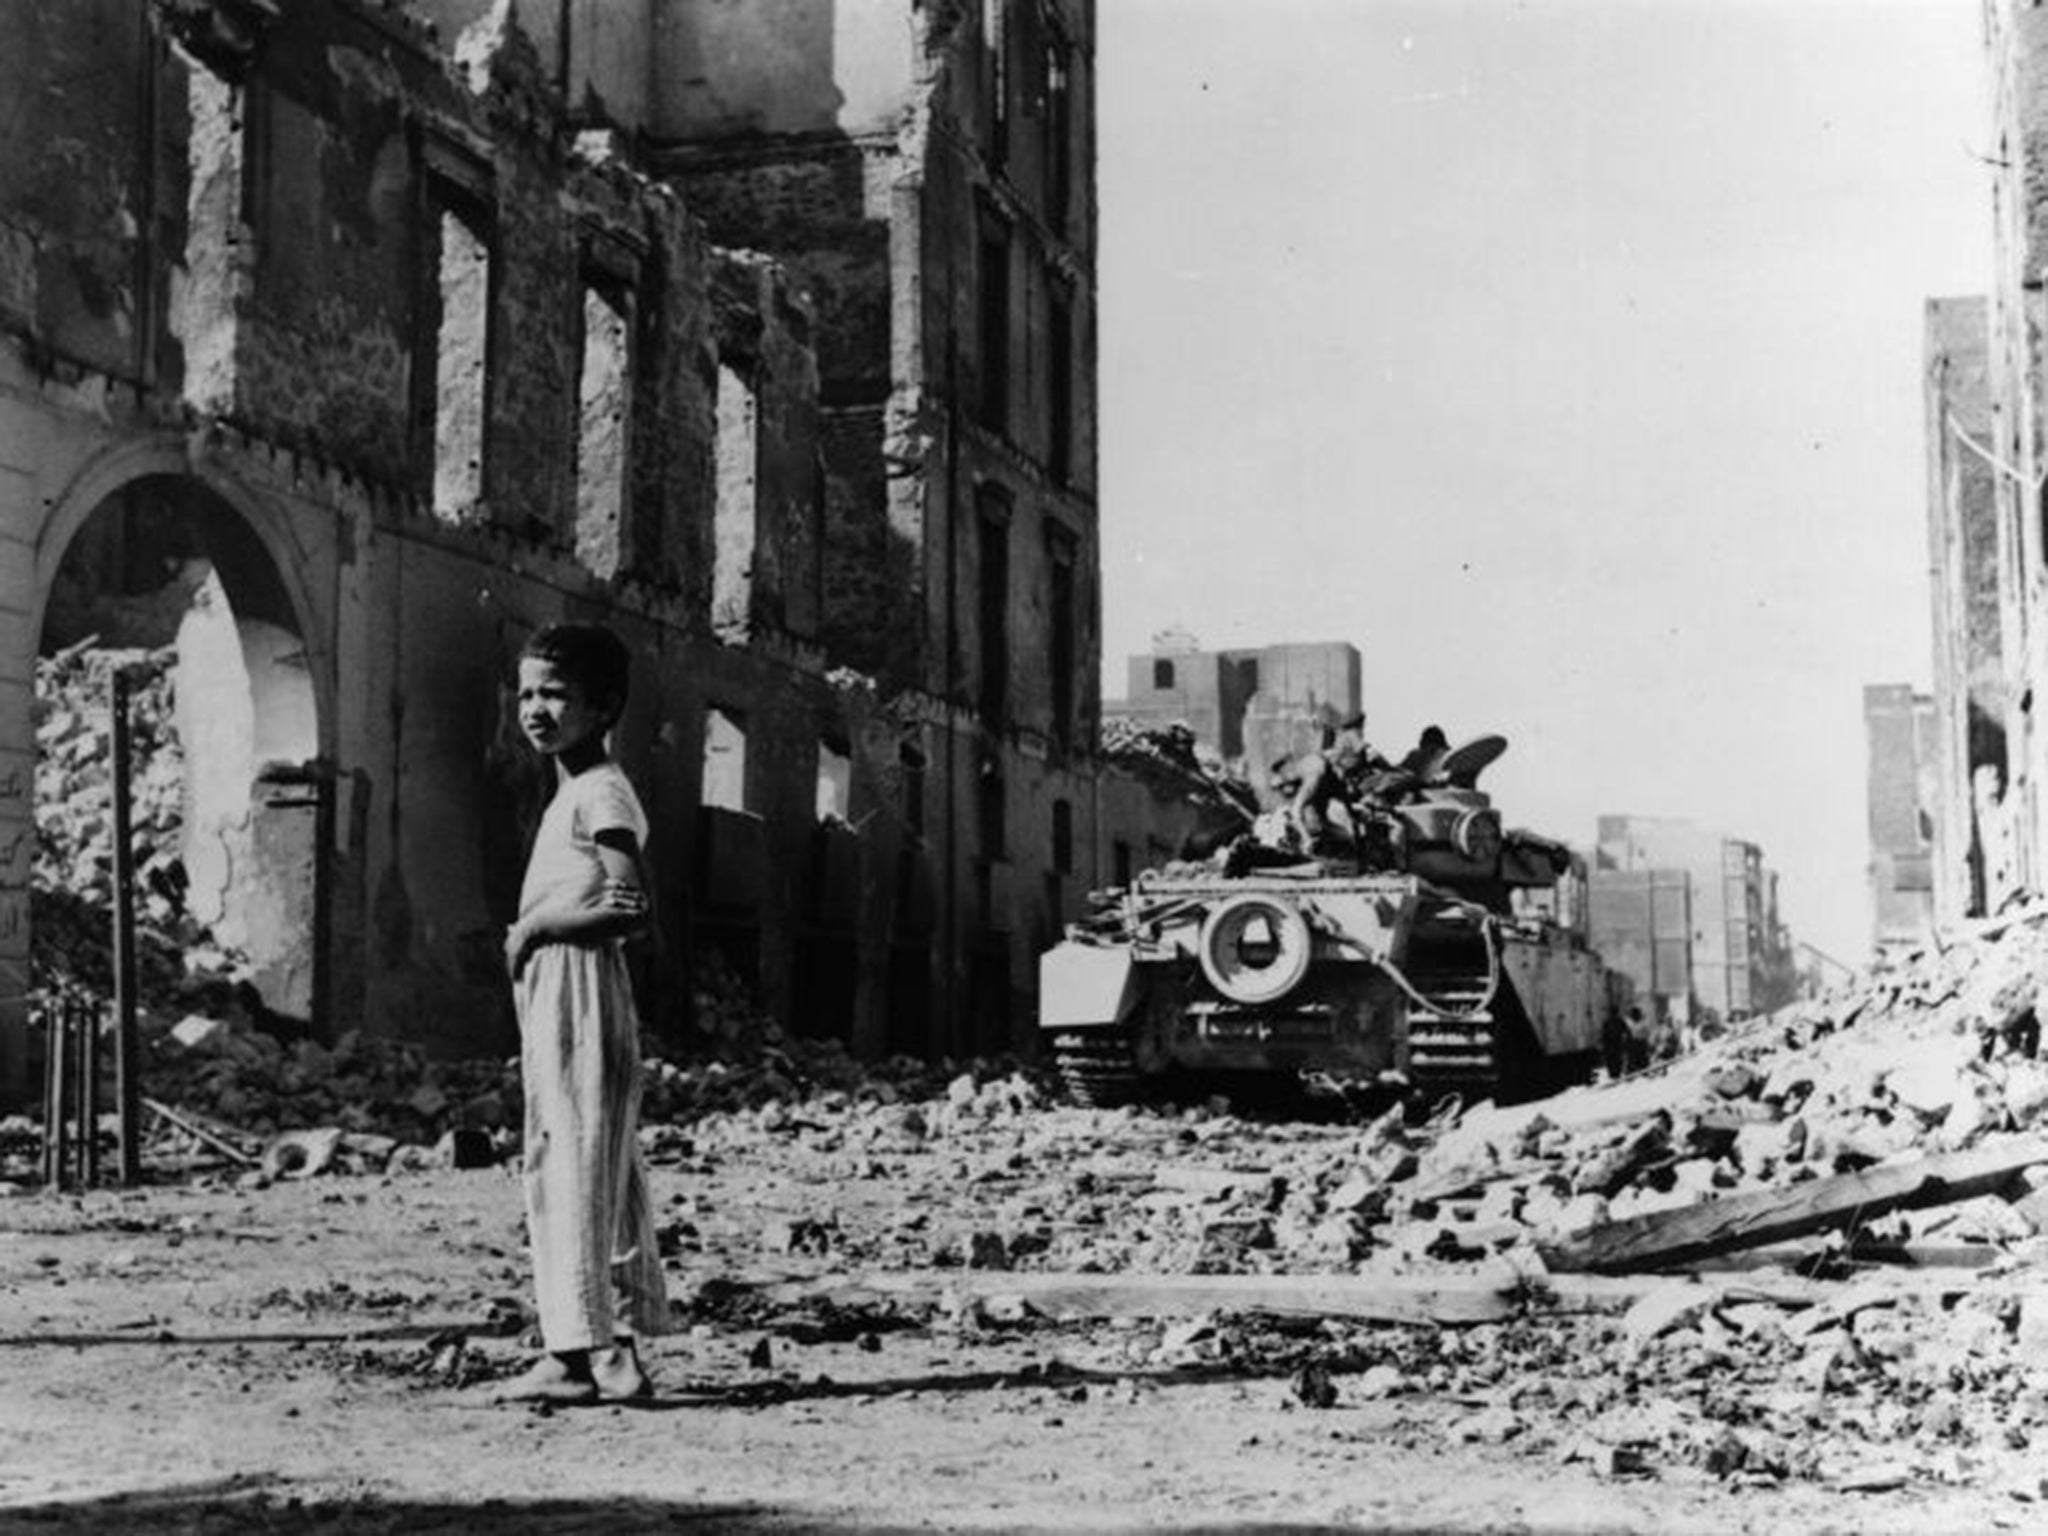 A British tank in a destroyed Egyptian street during the 1956 Suez crisis